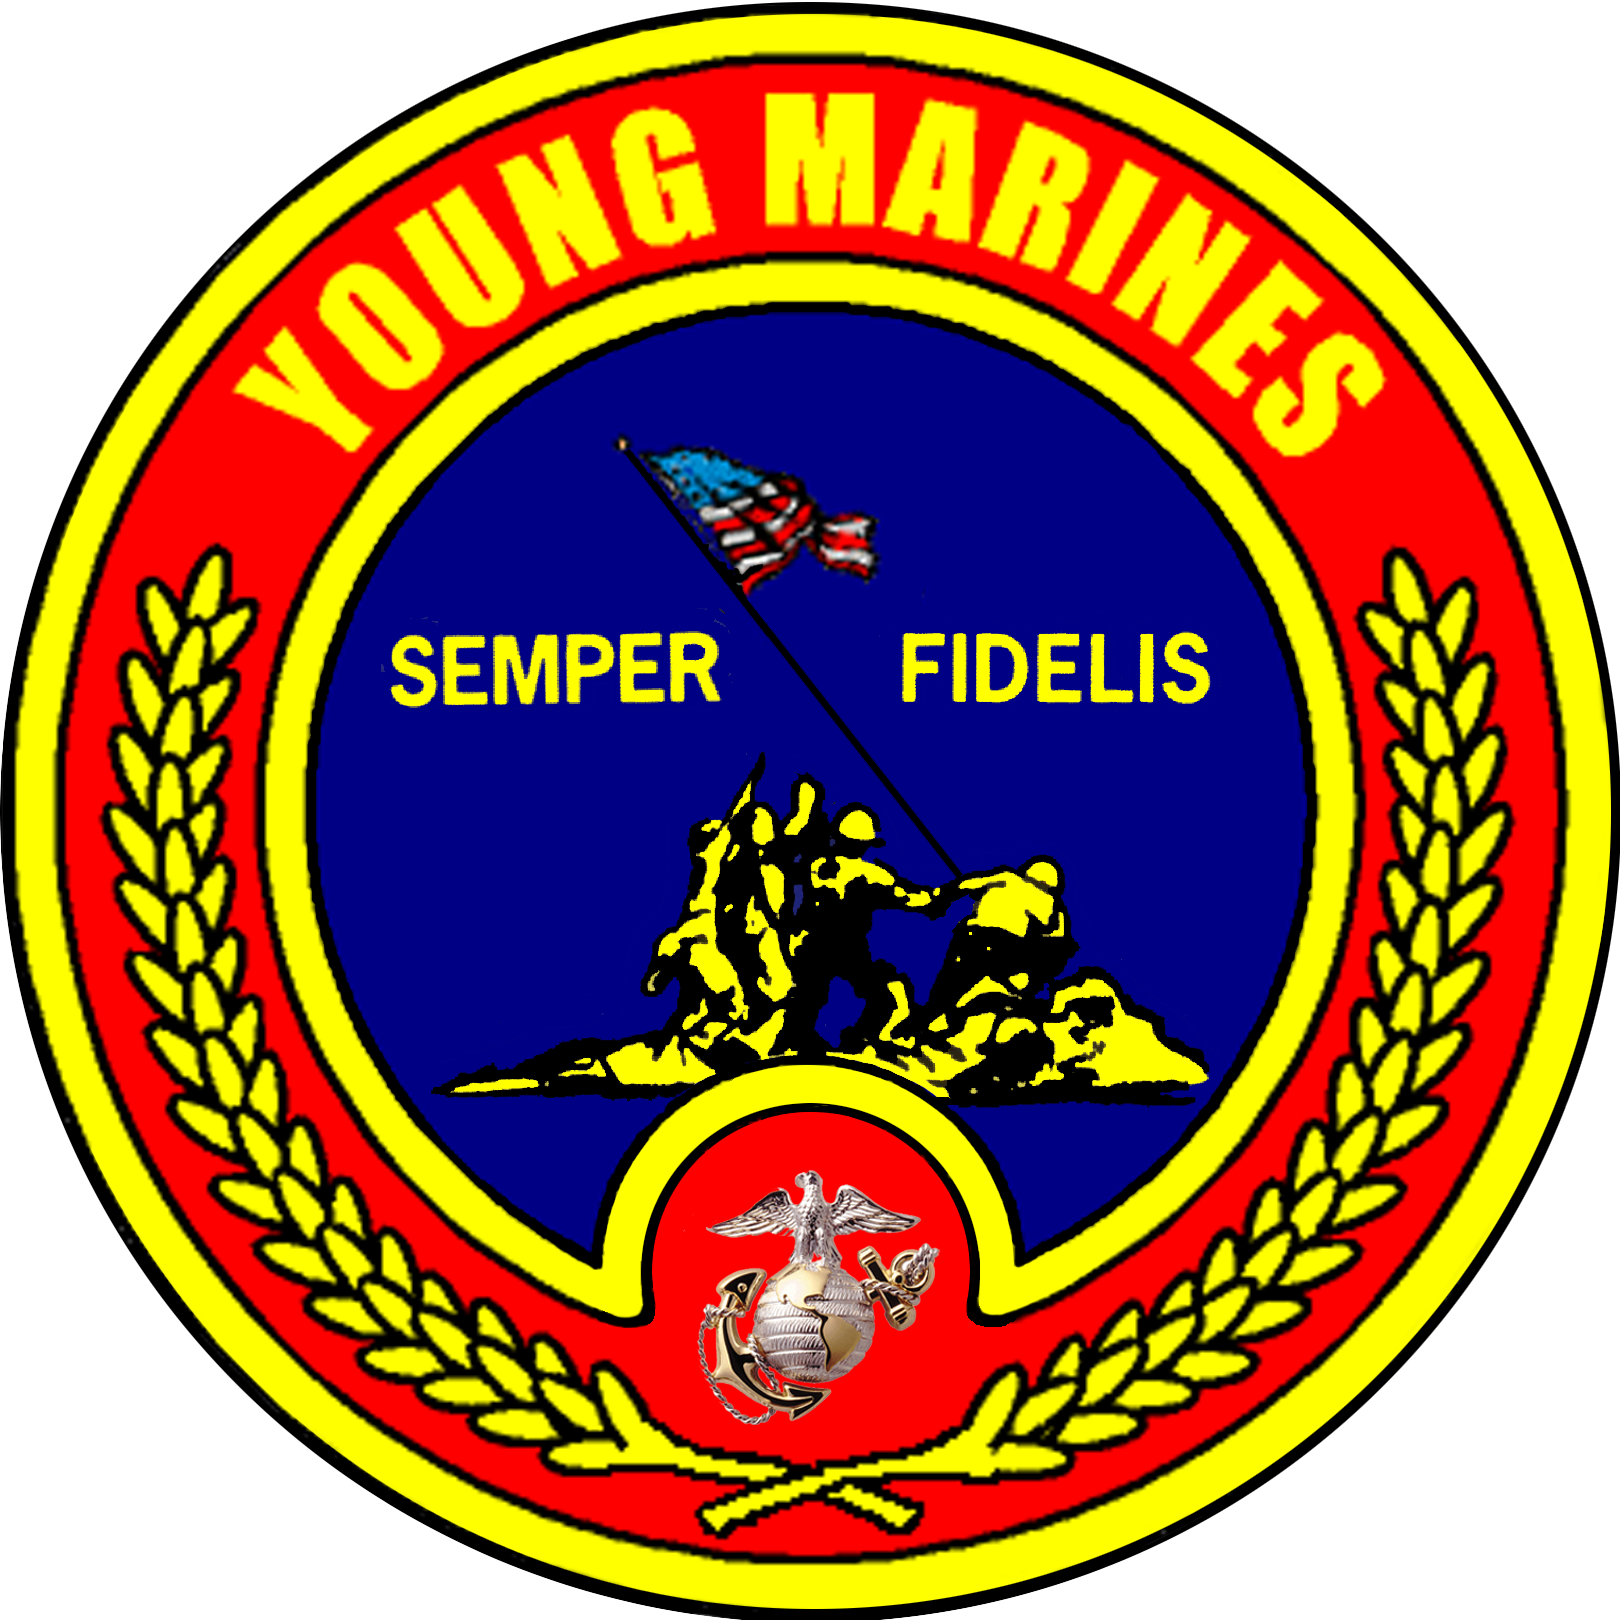 Young Marines - Wikipedia, the free encyclopedia